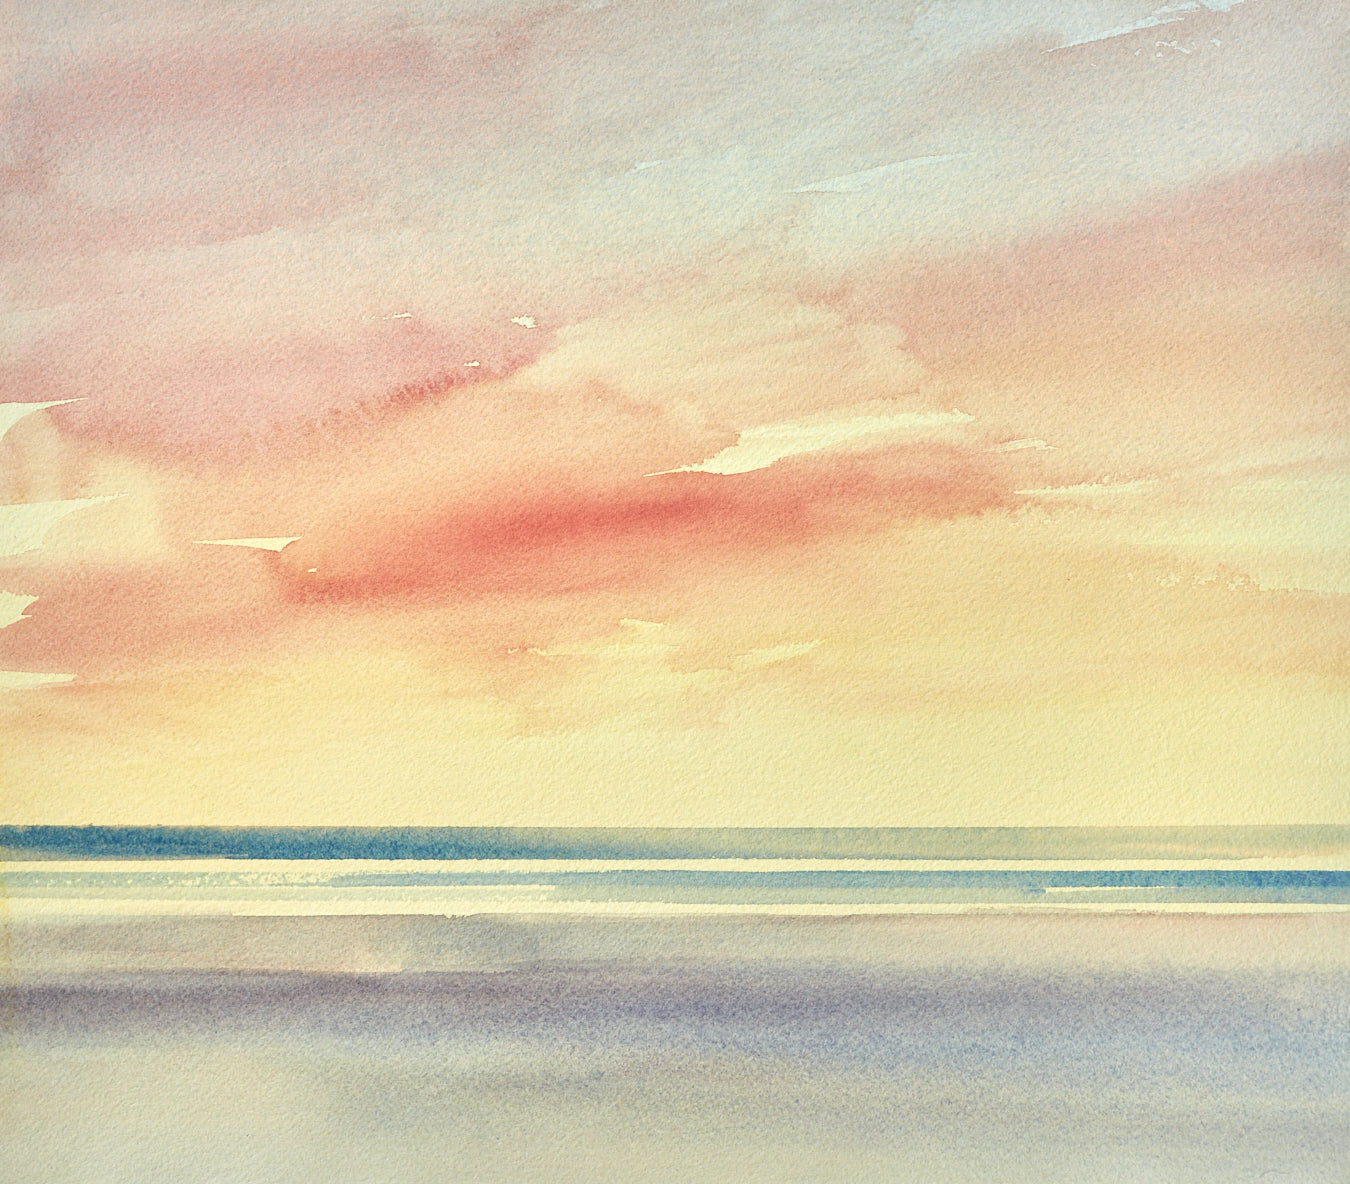 Large image of Twilight shoreline original watercolour painting by Timothy Gent